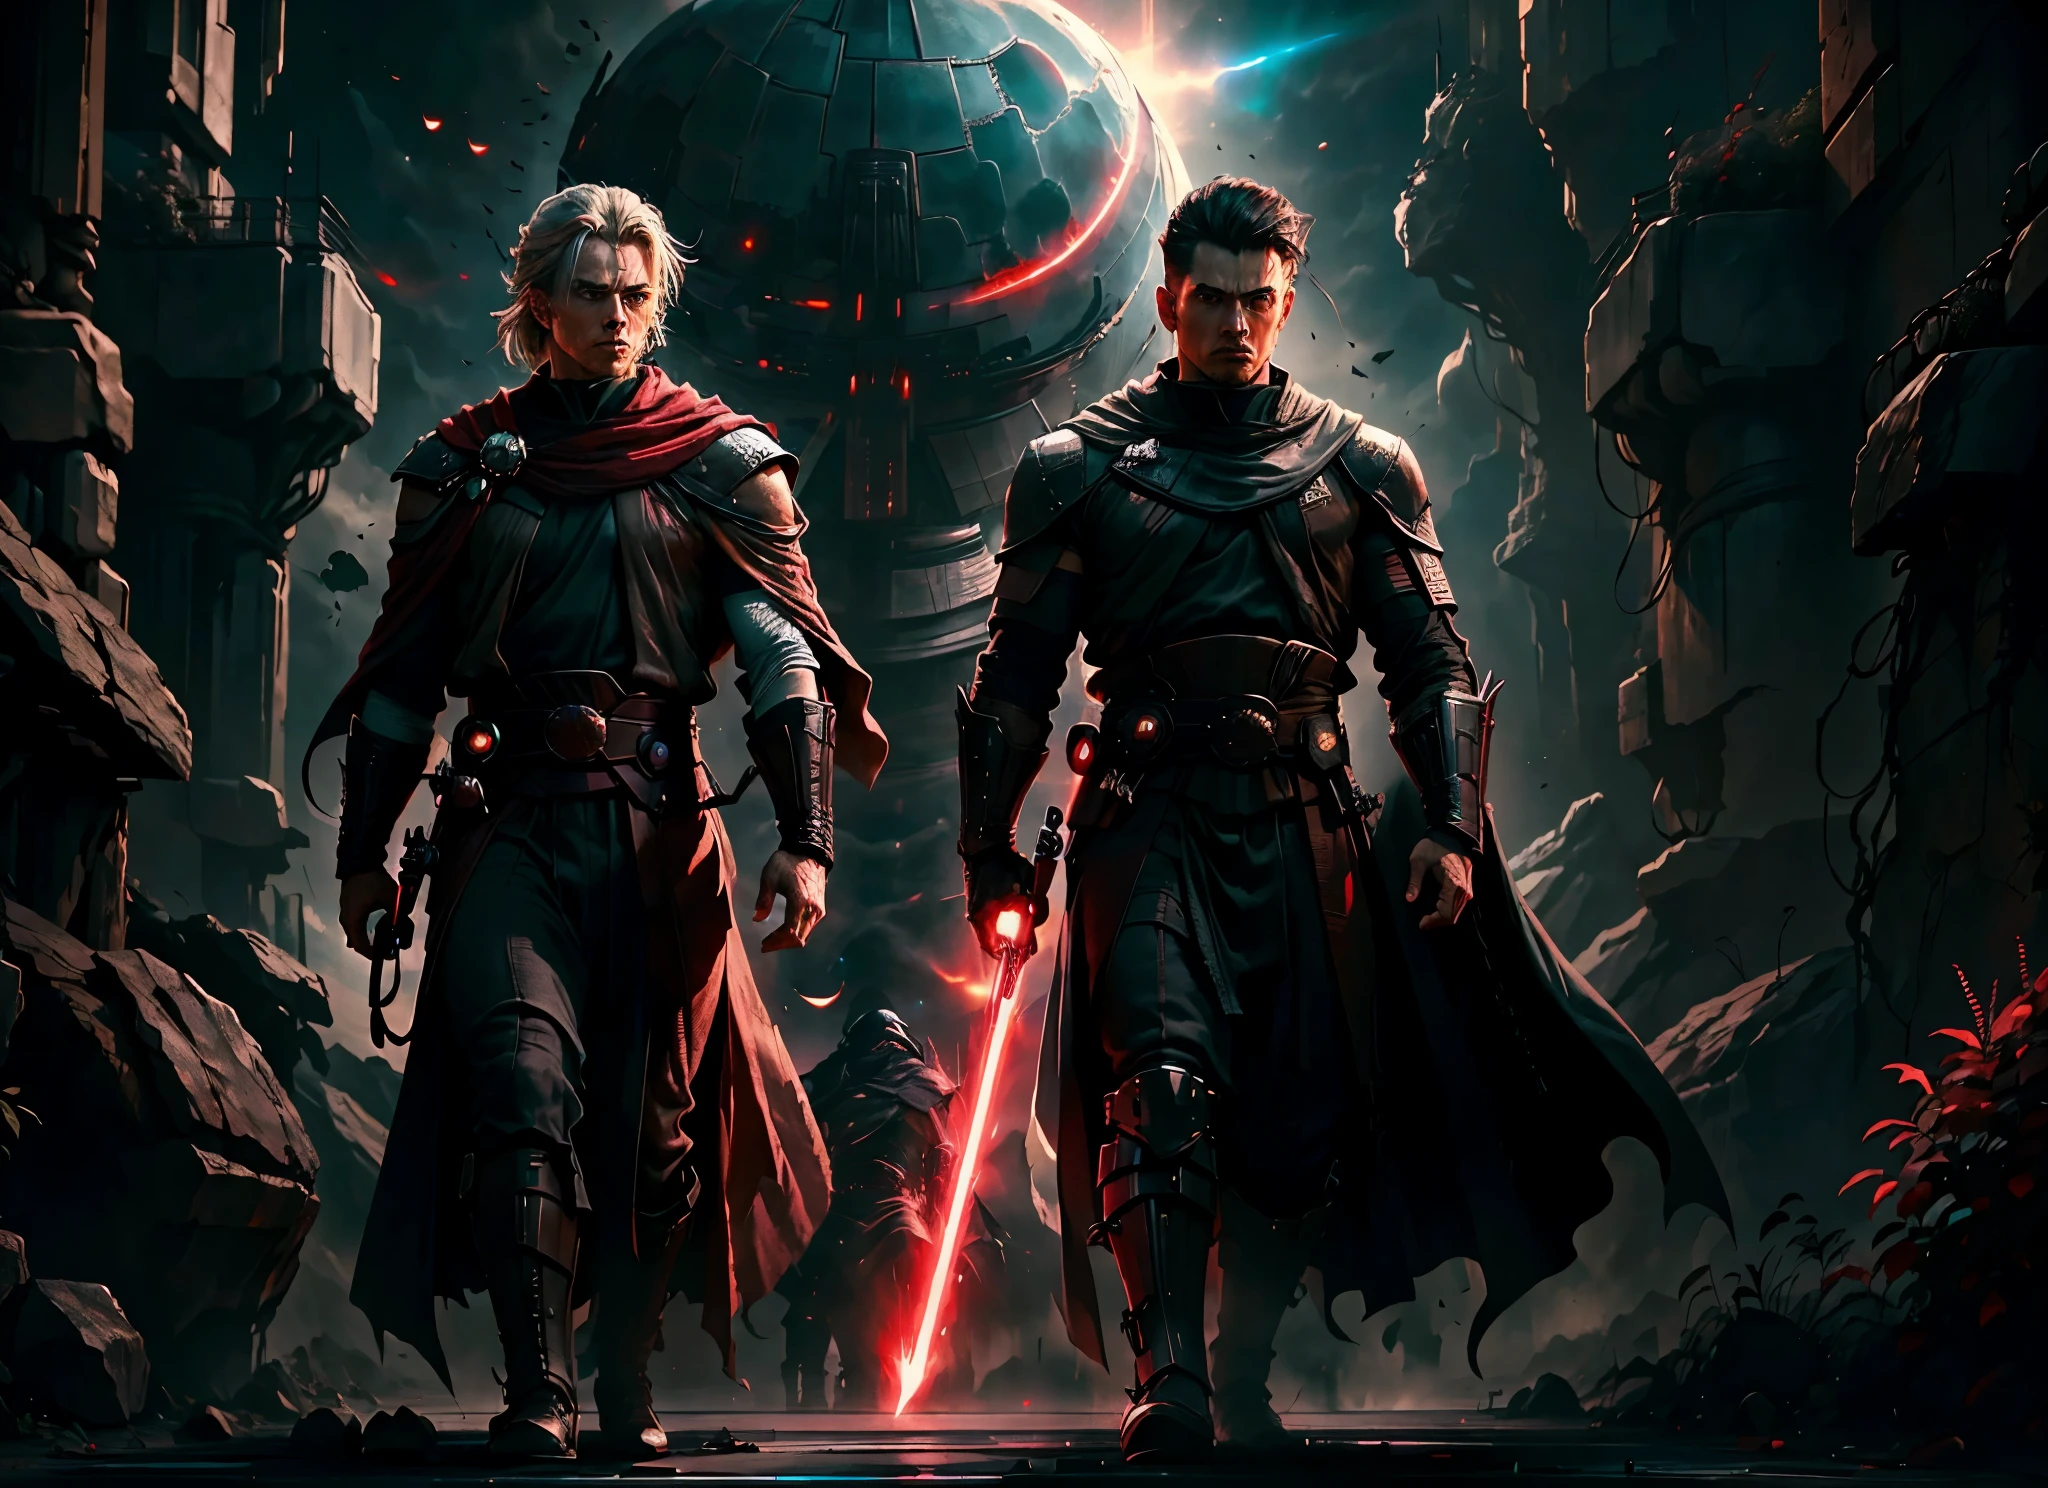 2 fierce young Jedi warriors, men, sith dark robes, red light sabers, ready for war, space opera, massive space ships, traces of the force around the men